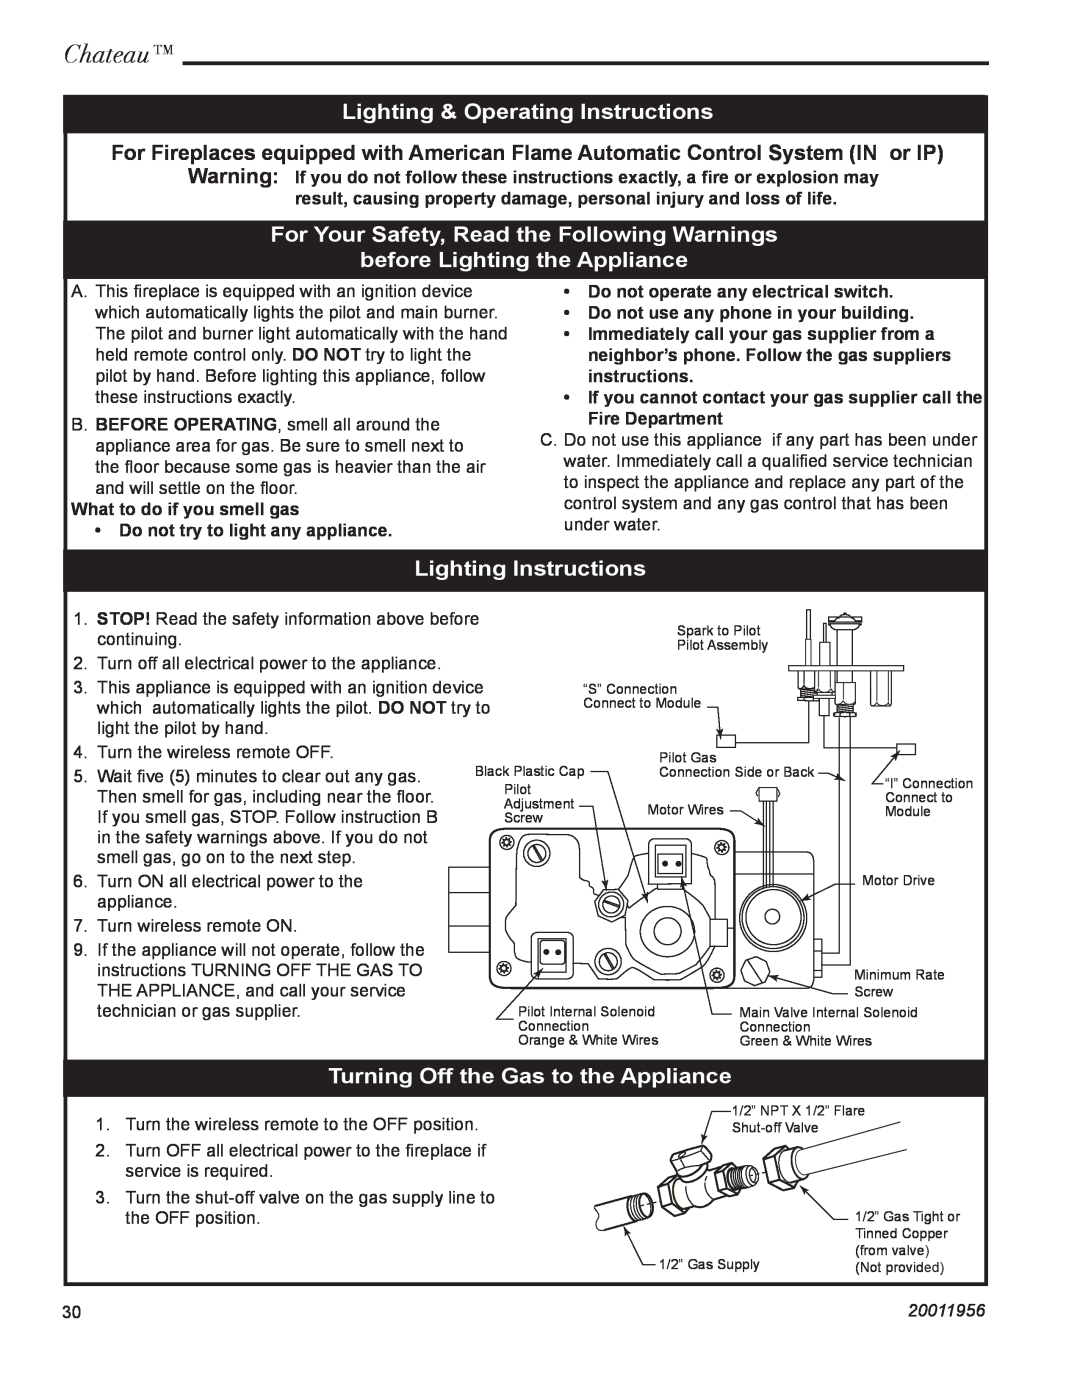 Vermont Casting DVT44 Lighting & Operating Instructions, For Your Safety, Read the Following Warnings, Chateau, 20011956 